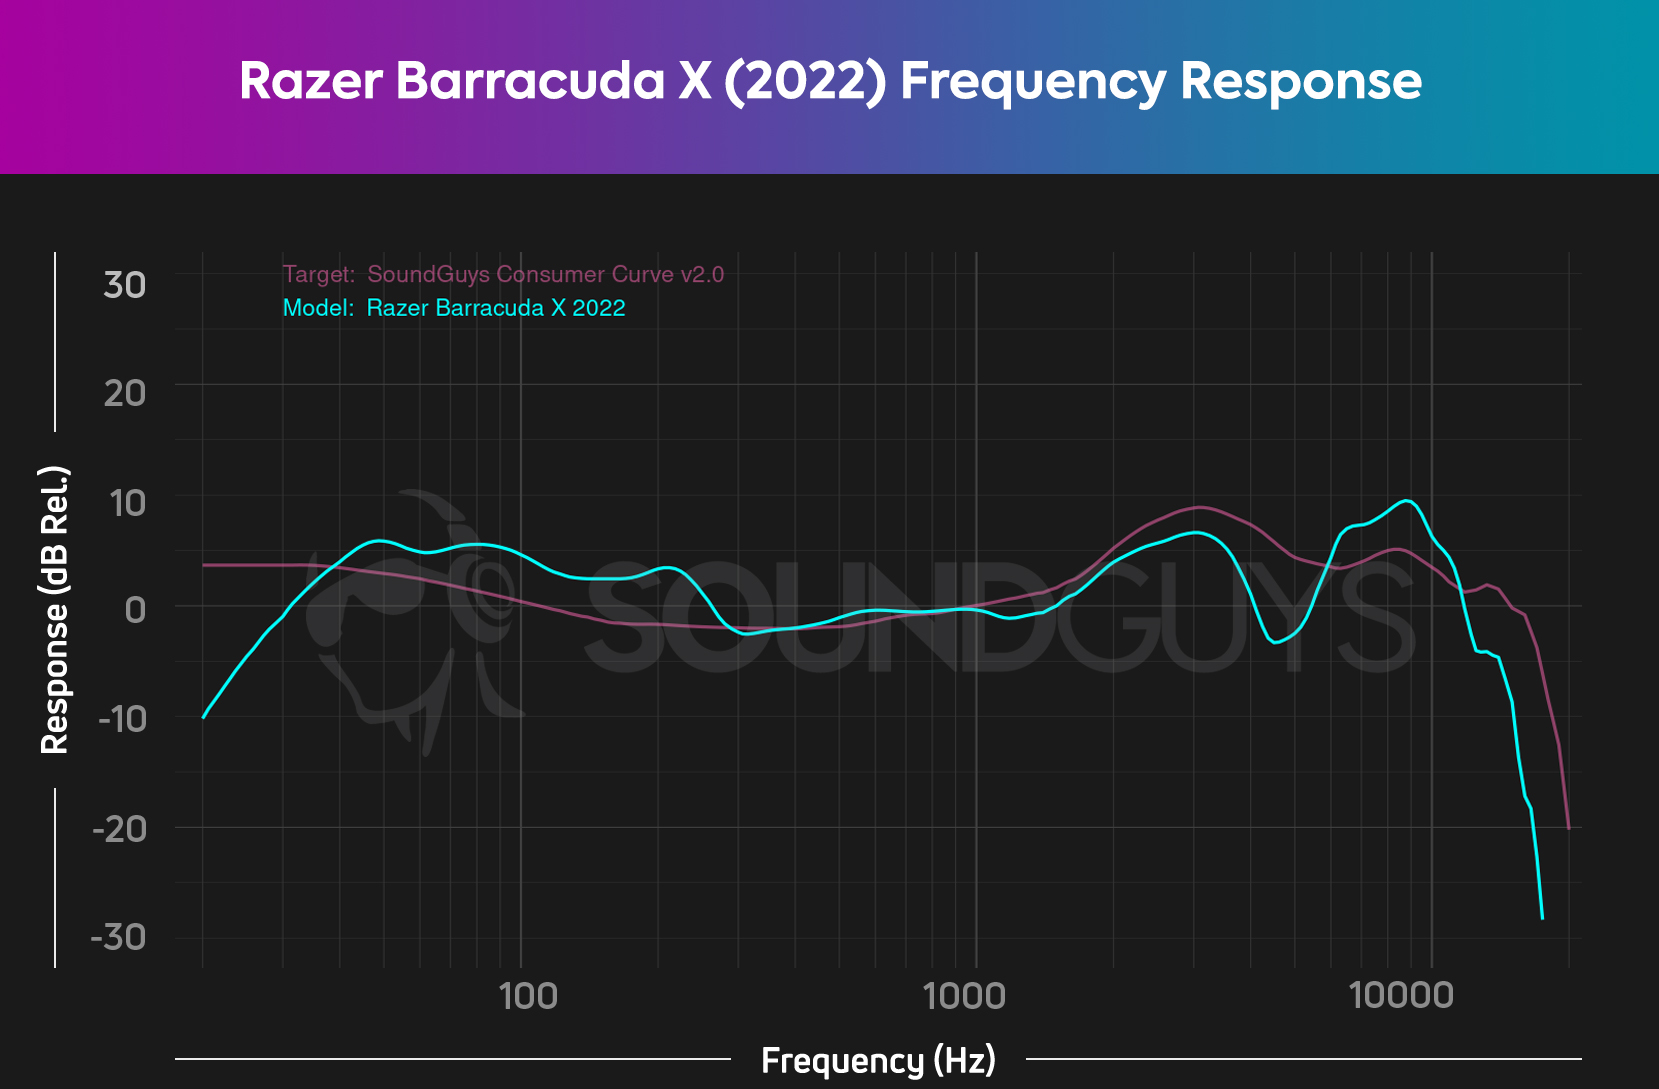 The Razer Barracuda X (2022) frequency response chart, showing a boost in the bass range, some variations in the highs, and mids that closely follow our consumer curve.